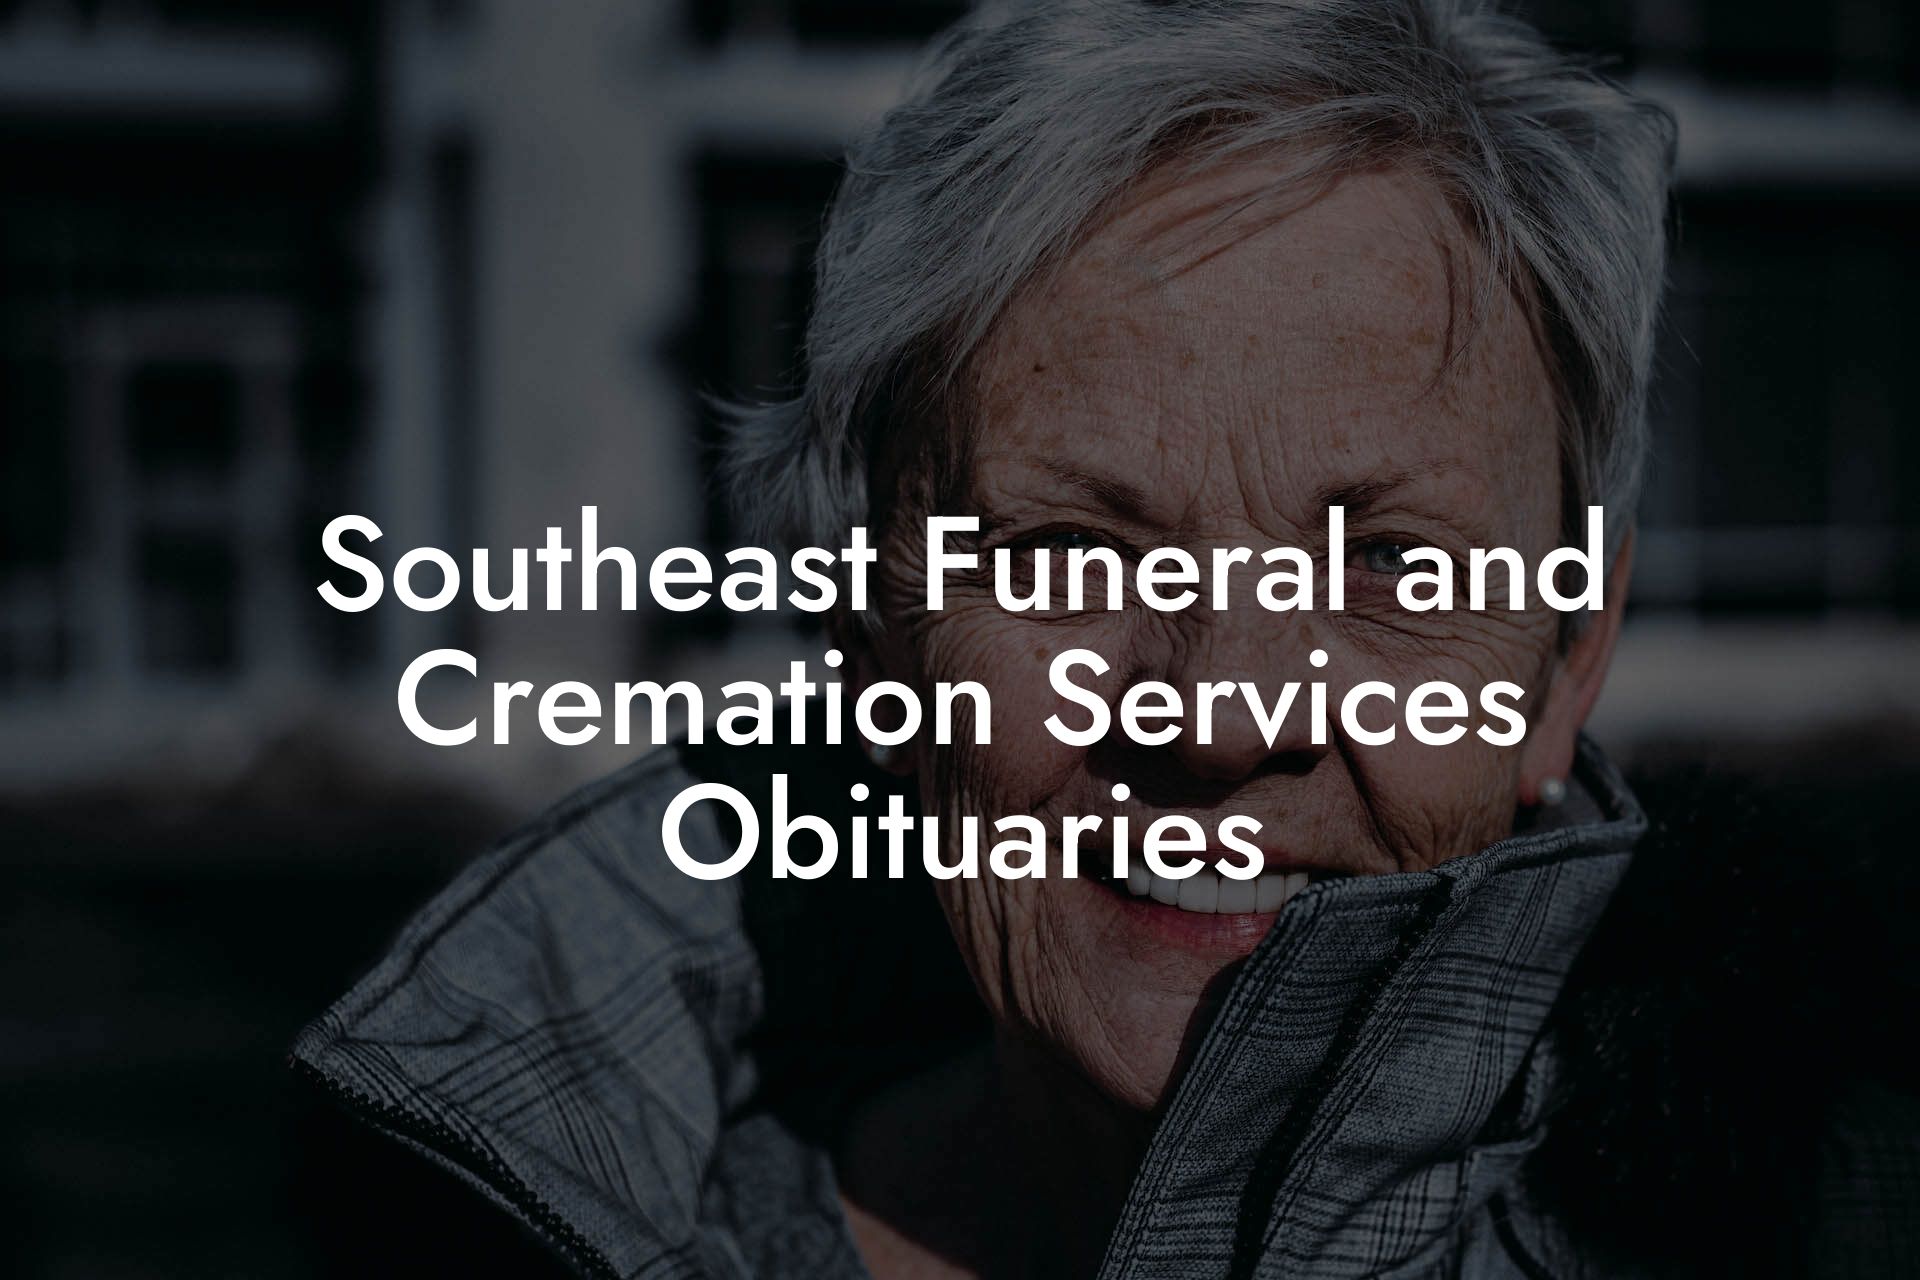 Southeast Funeral and Cremation Services Obituaries